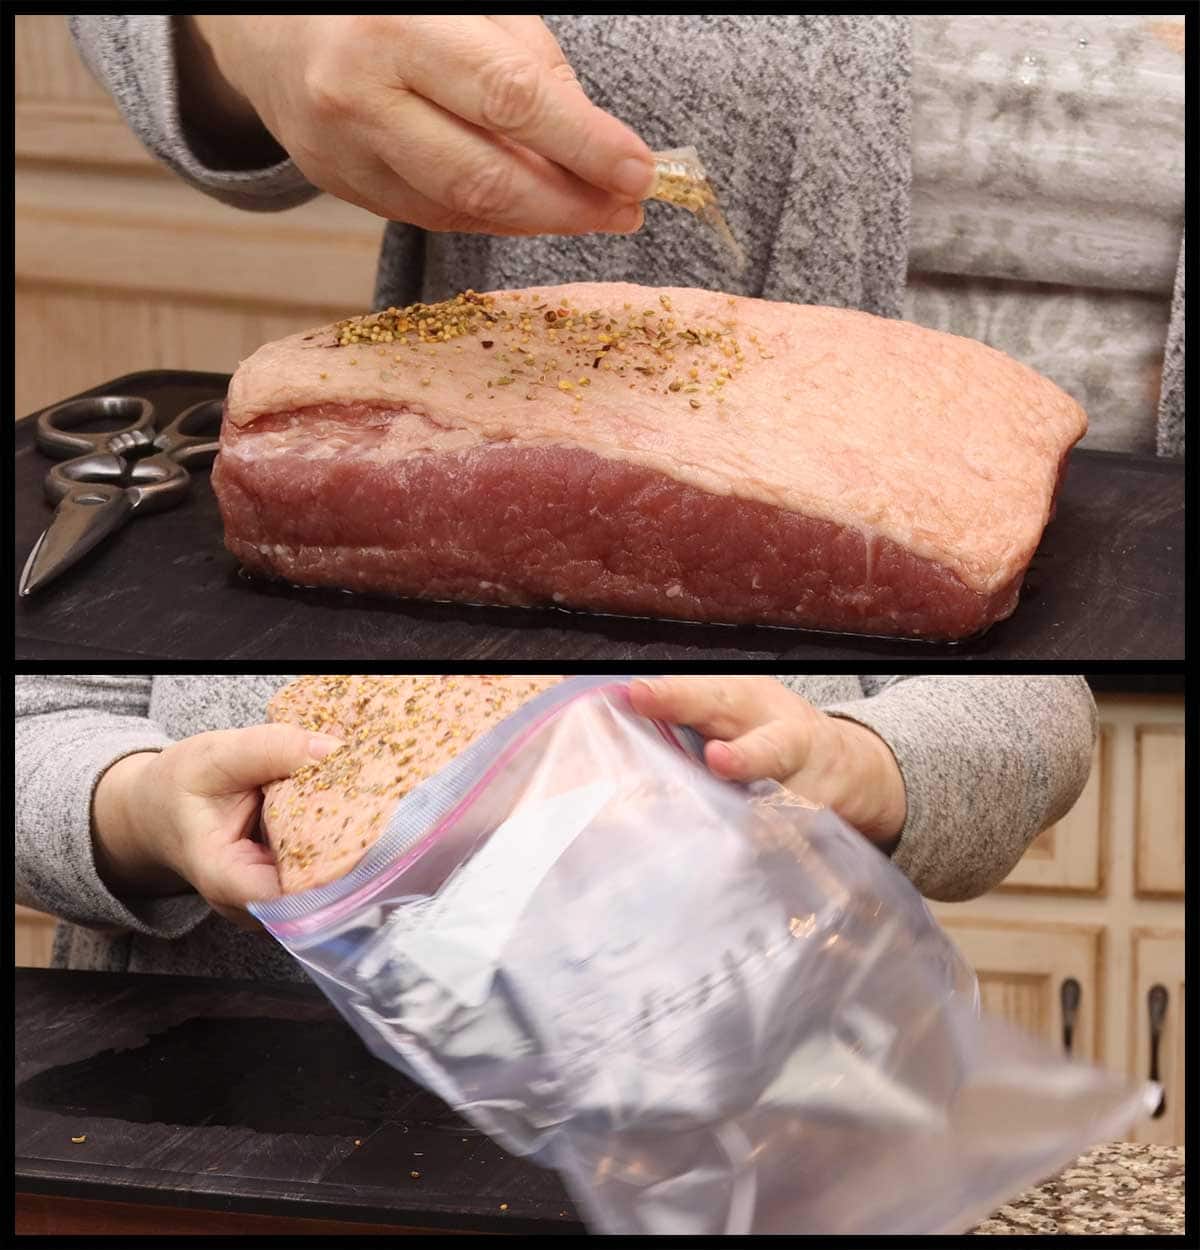 seasoning the corned beef with spice packet and placing it into a ziplock bag.